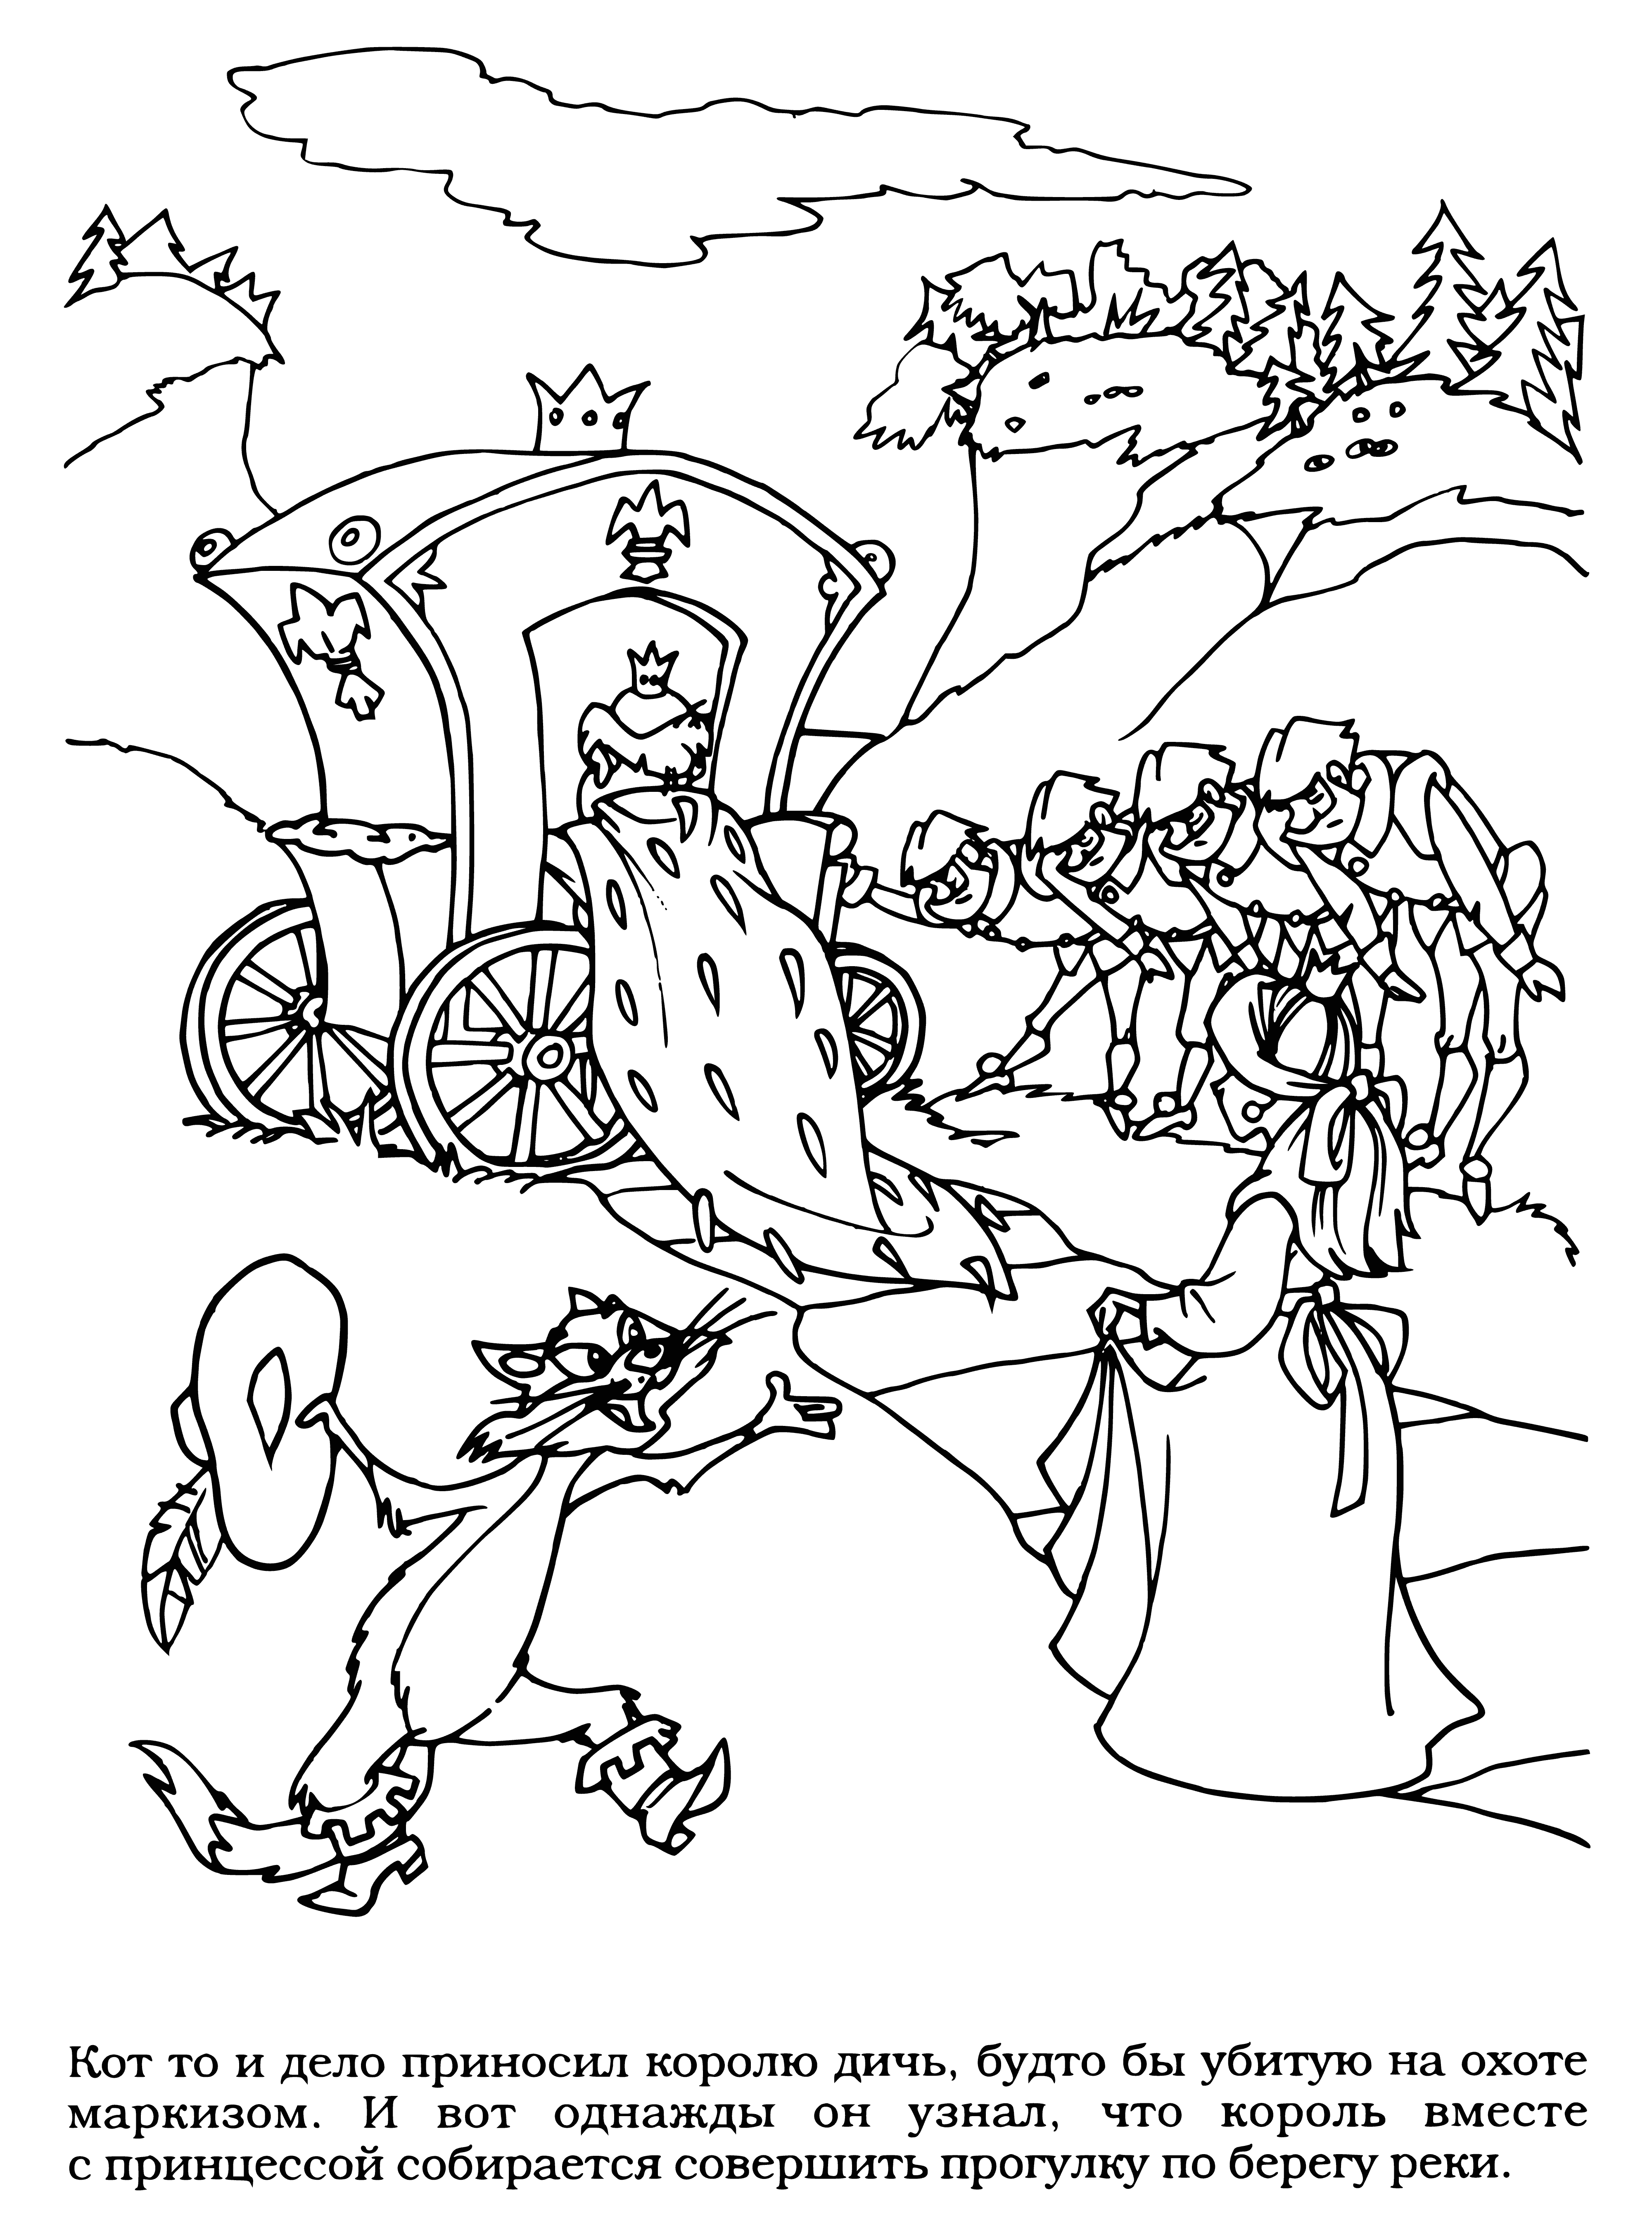 coloring page: King wears red w/ gold buttons & crown, carries staff. Surrounded by 4 in armor walking through forest.